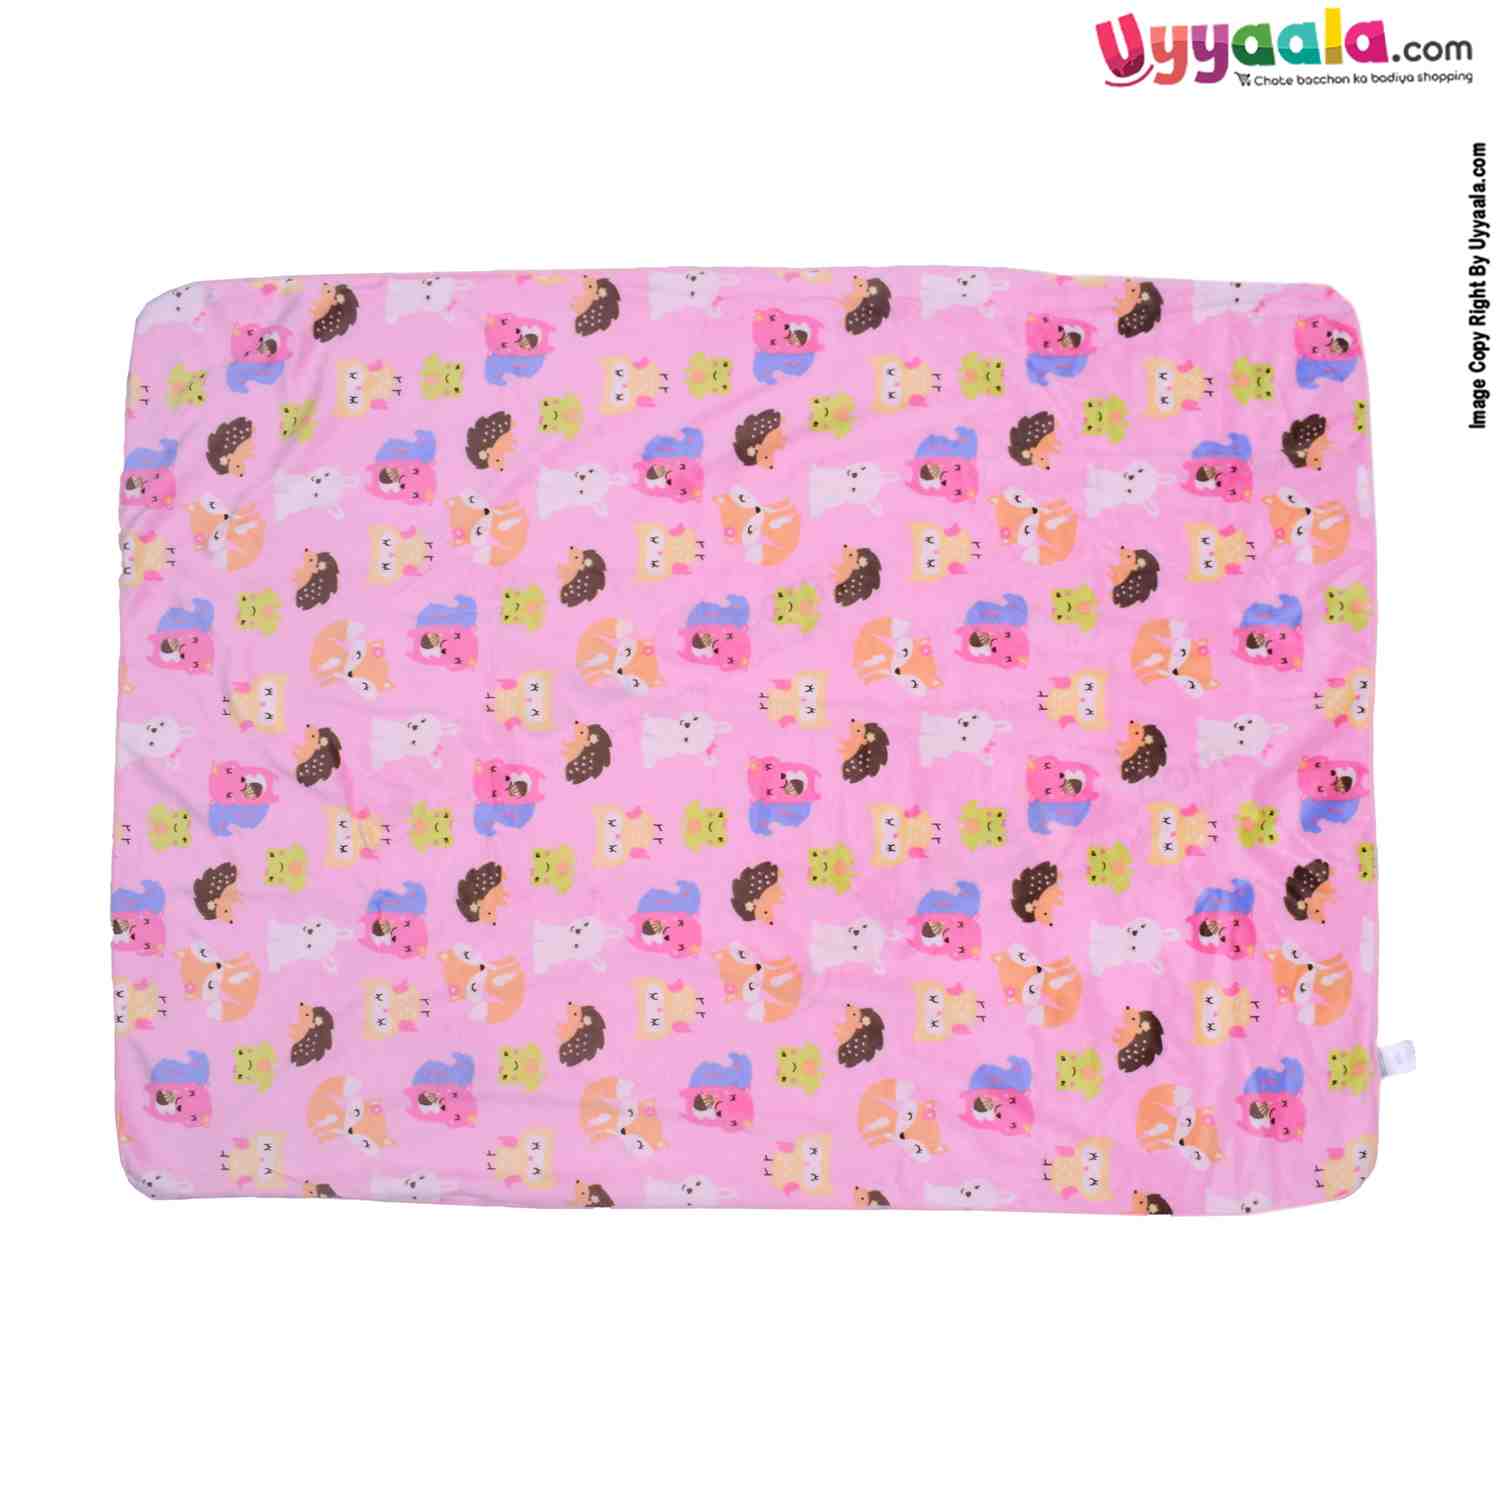 Double Layered Blanket One Side Fur & Other Side Velvet with Animals Print 0-24m Age, Size (99*75cm)- Pink